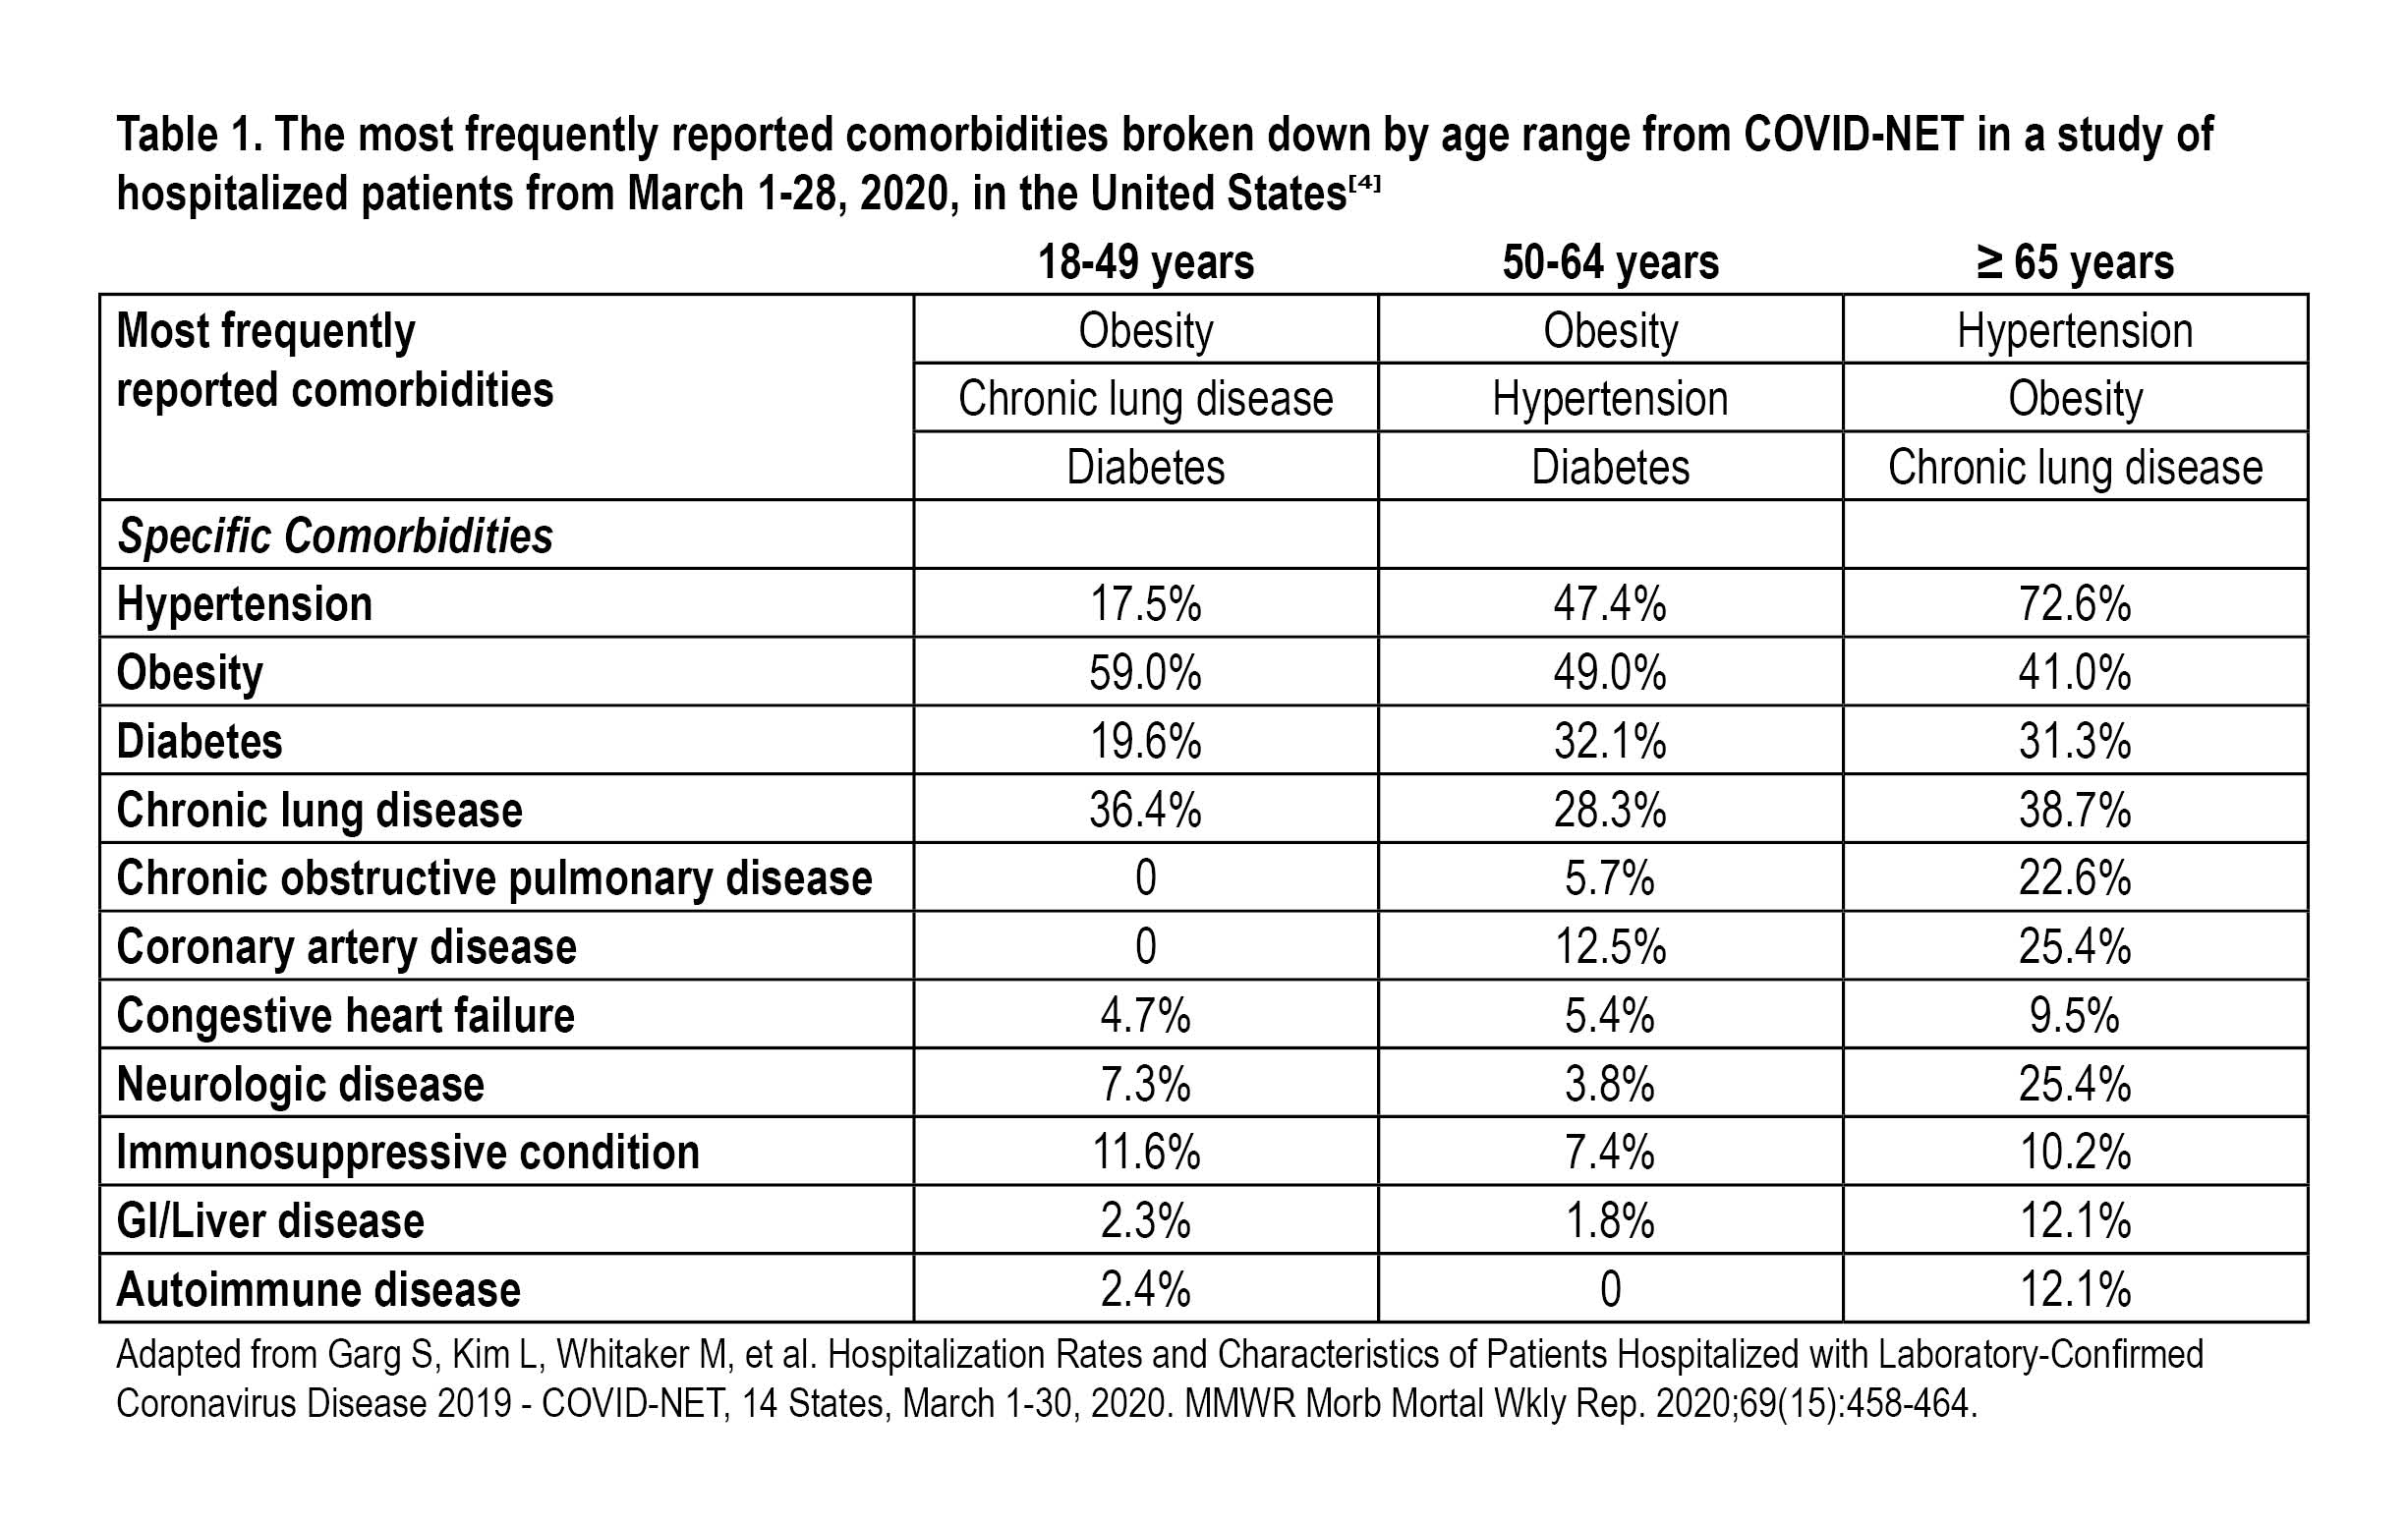 Most frequently reported comorbidities